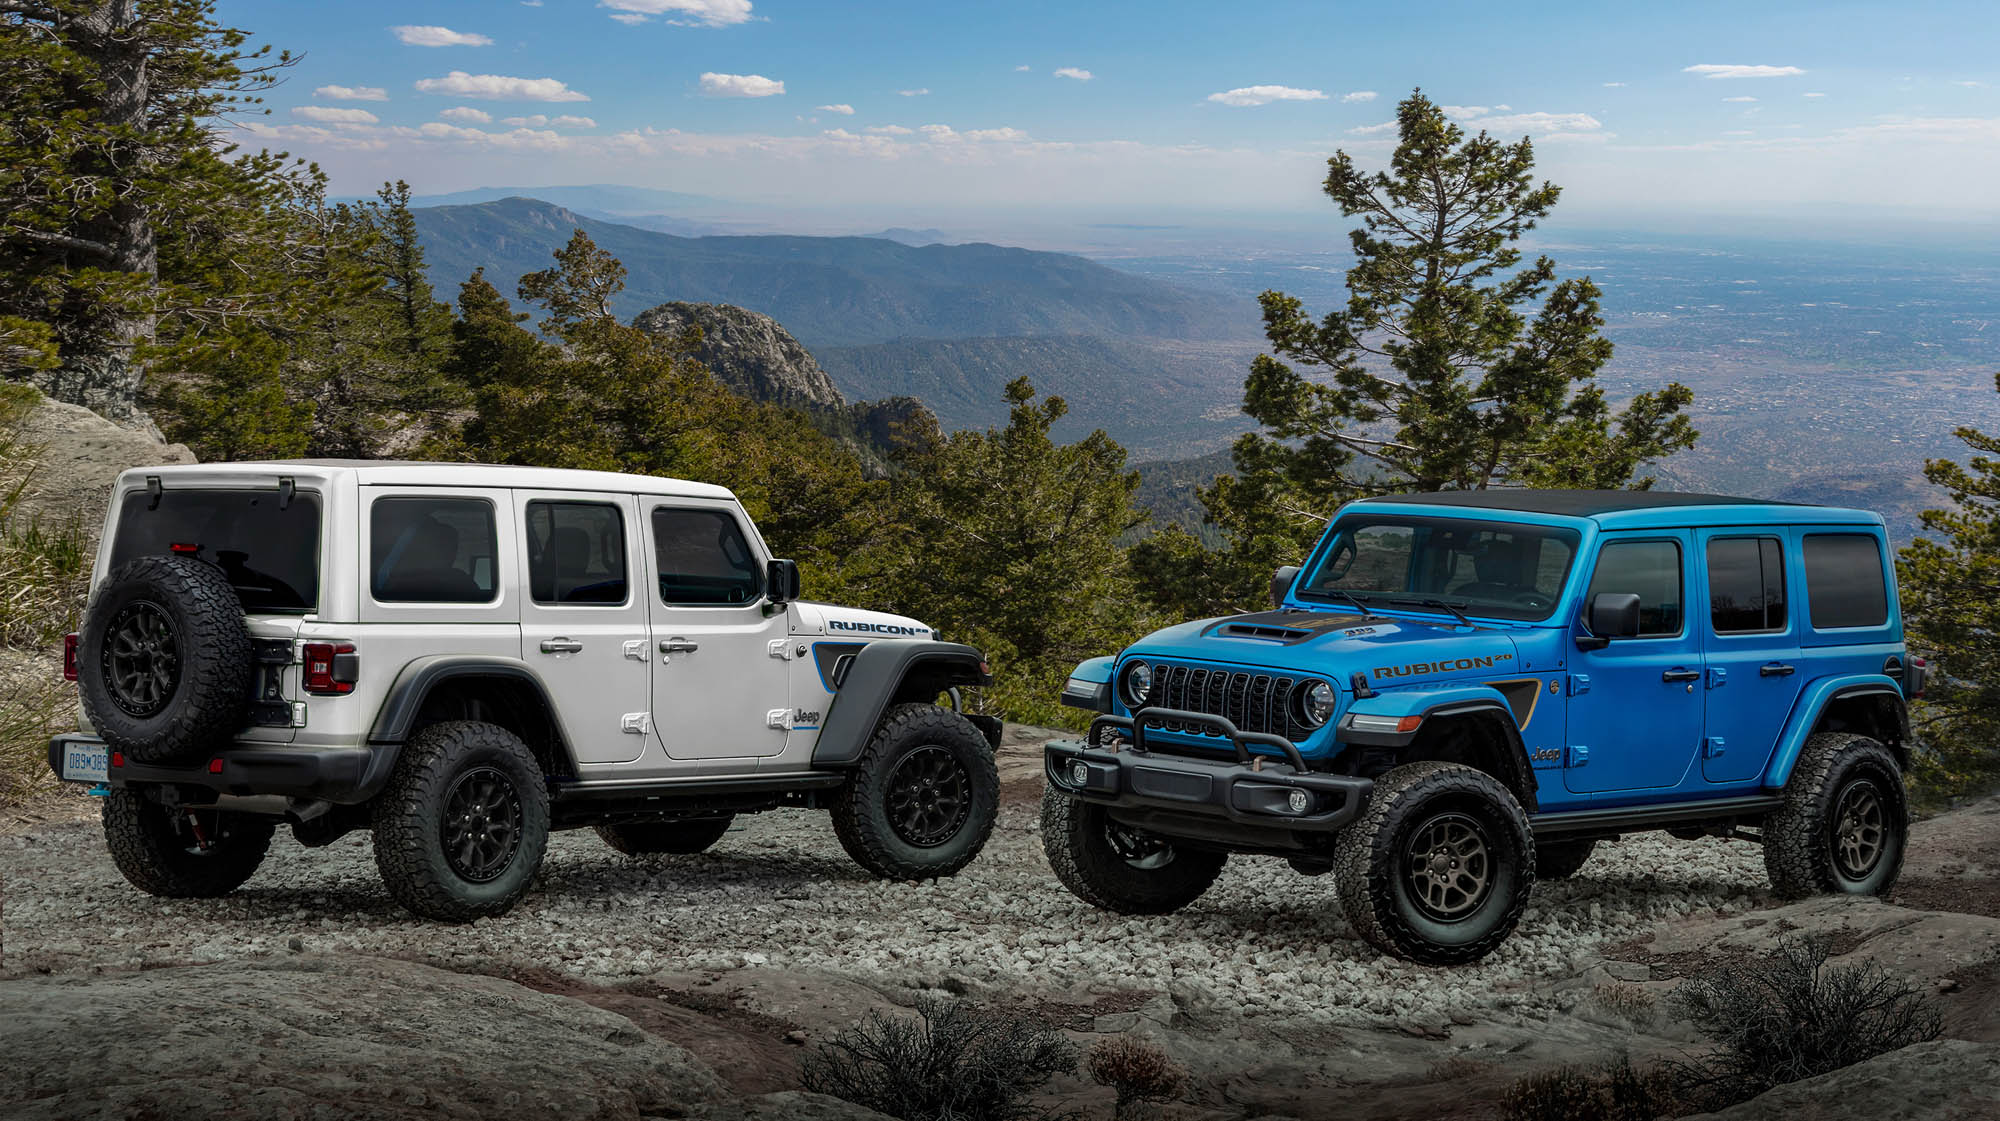 Rubicon 20th Anniversary editions: 2023 Jeep® Wrangler Rubicon 4xe (left, shown with optional Hinge-Gate Reinforcement by Mopar) and 2023 Jeep Wrangler Rubicon 392